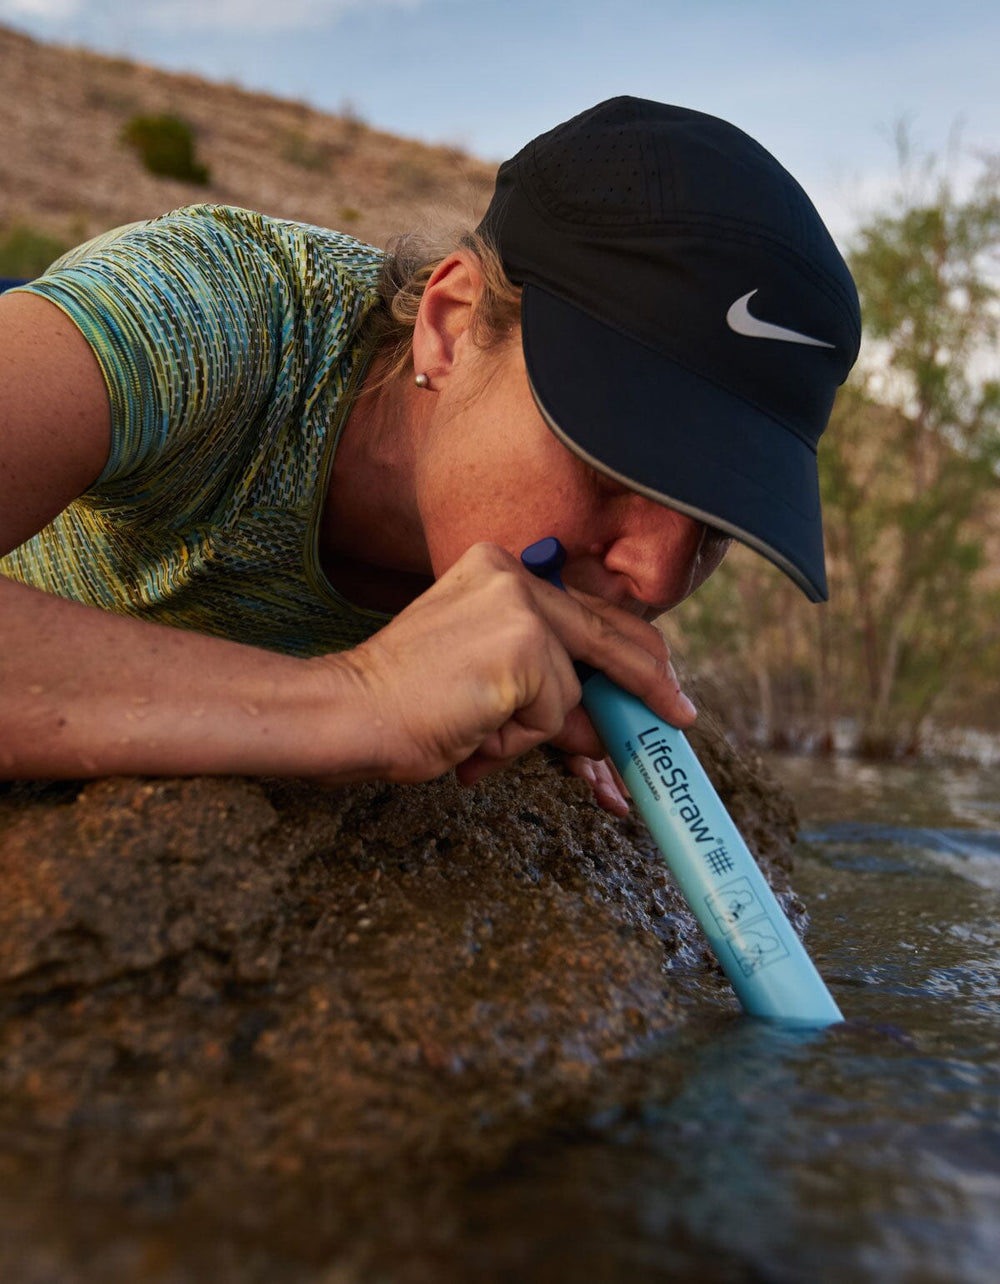  LifeStraw Personal Blue 4 Pack : Sports & Outdoors